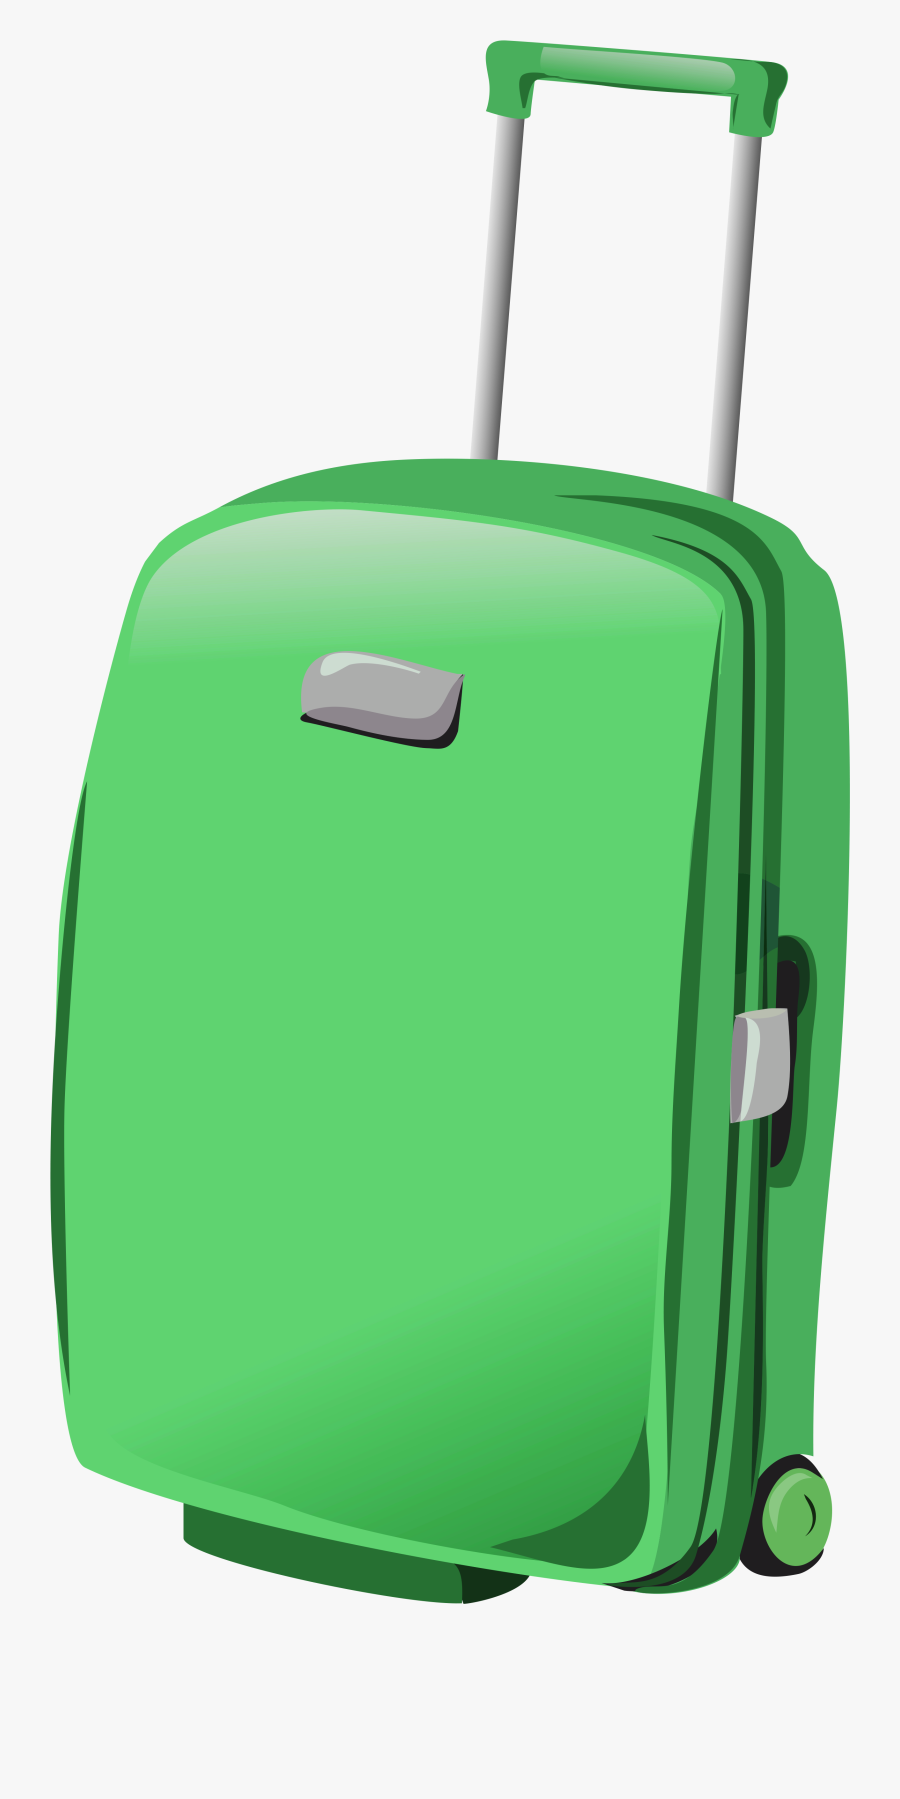 Green Suitcase Png Clipartu200b Gallery Yopriceville - Transparent Background Luggage Png, Transparent Clipart